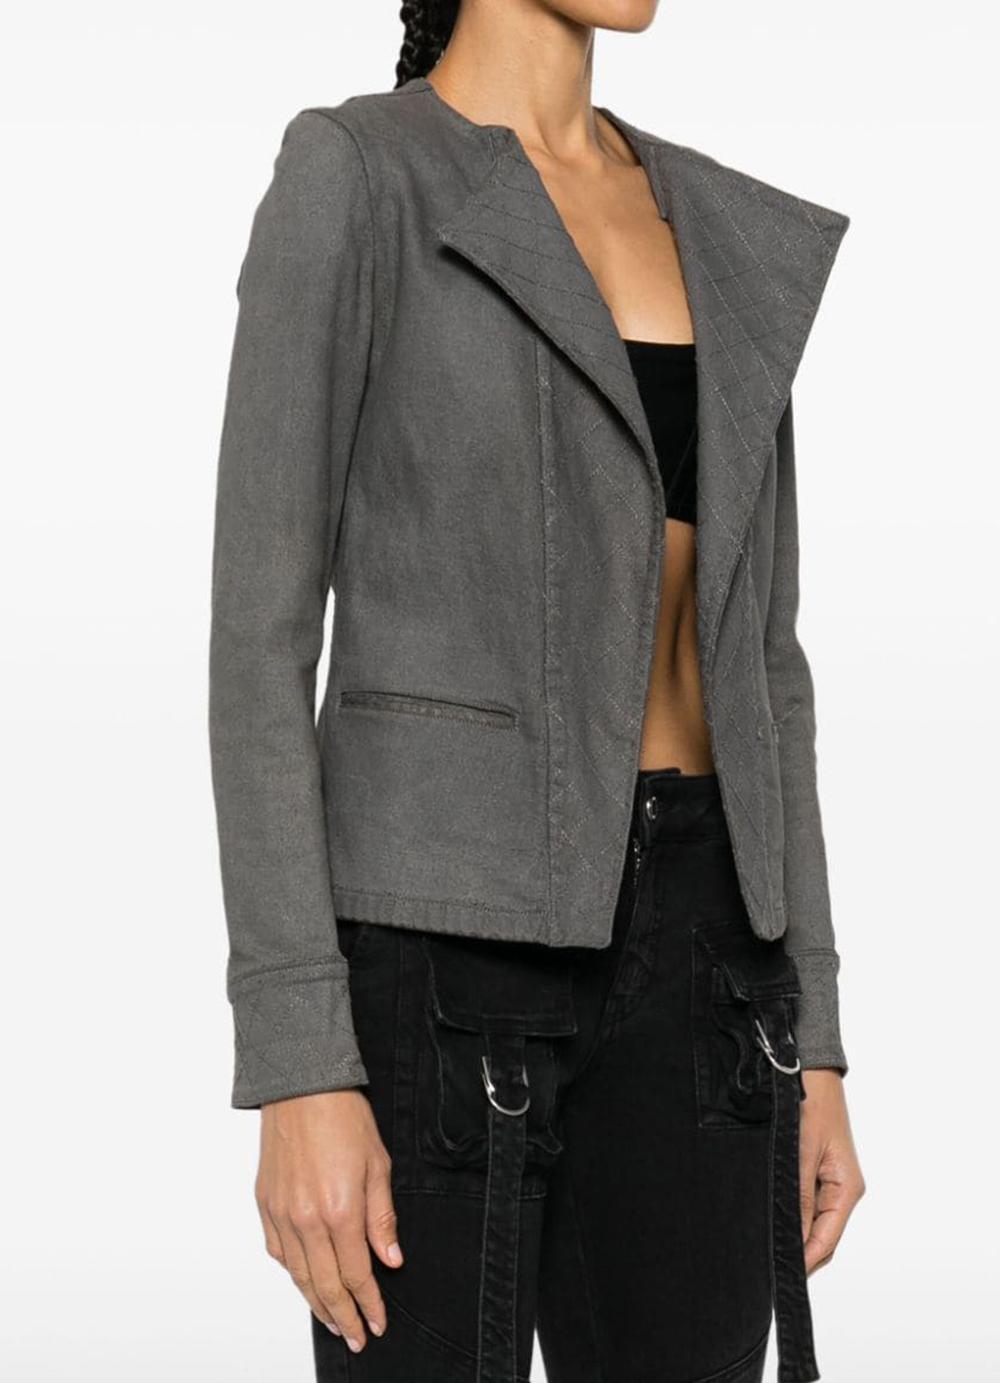 Chanel grey diamond-quilted cotton jacket featuring a stretch-cotton base, diamond-quilted detailing, a spread collar, open front, two front welt pockets, long sleeves, straight hem, a center back logo plaque.
Composition: Cotton 95%, Elastane